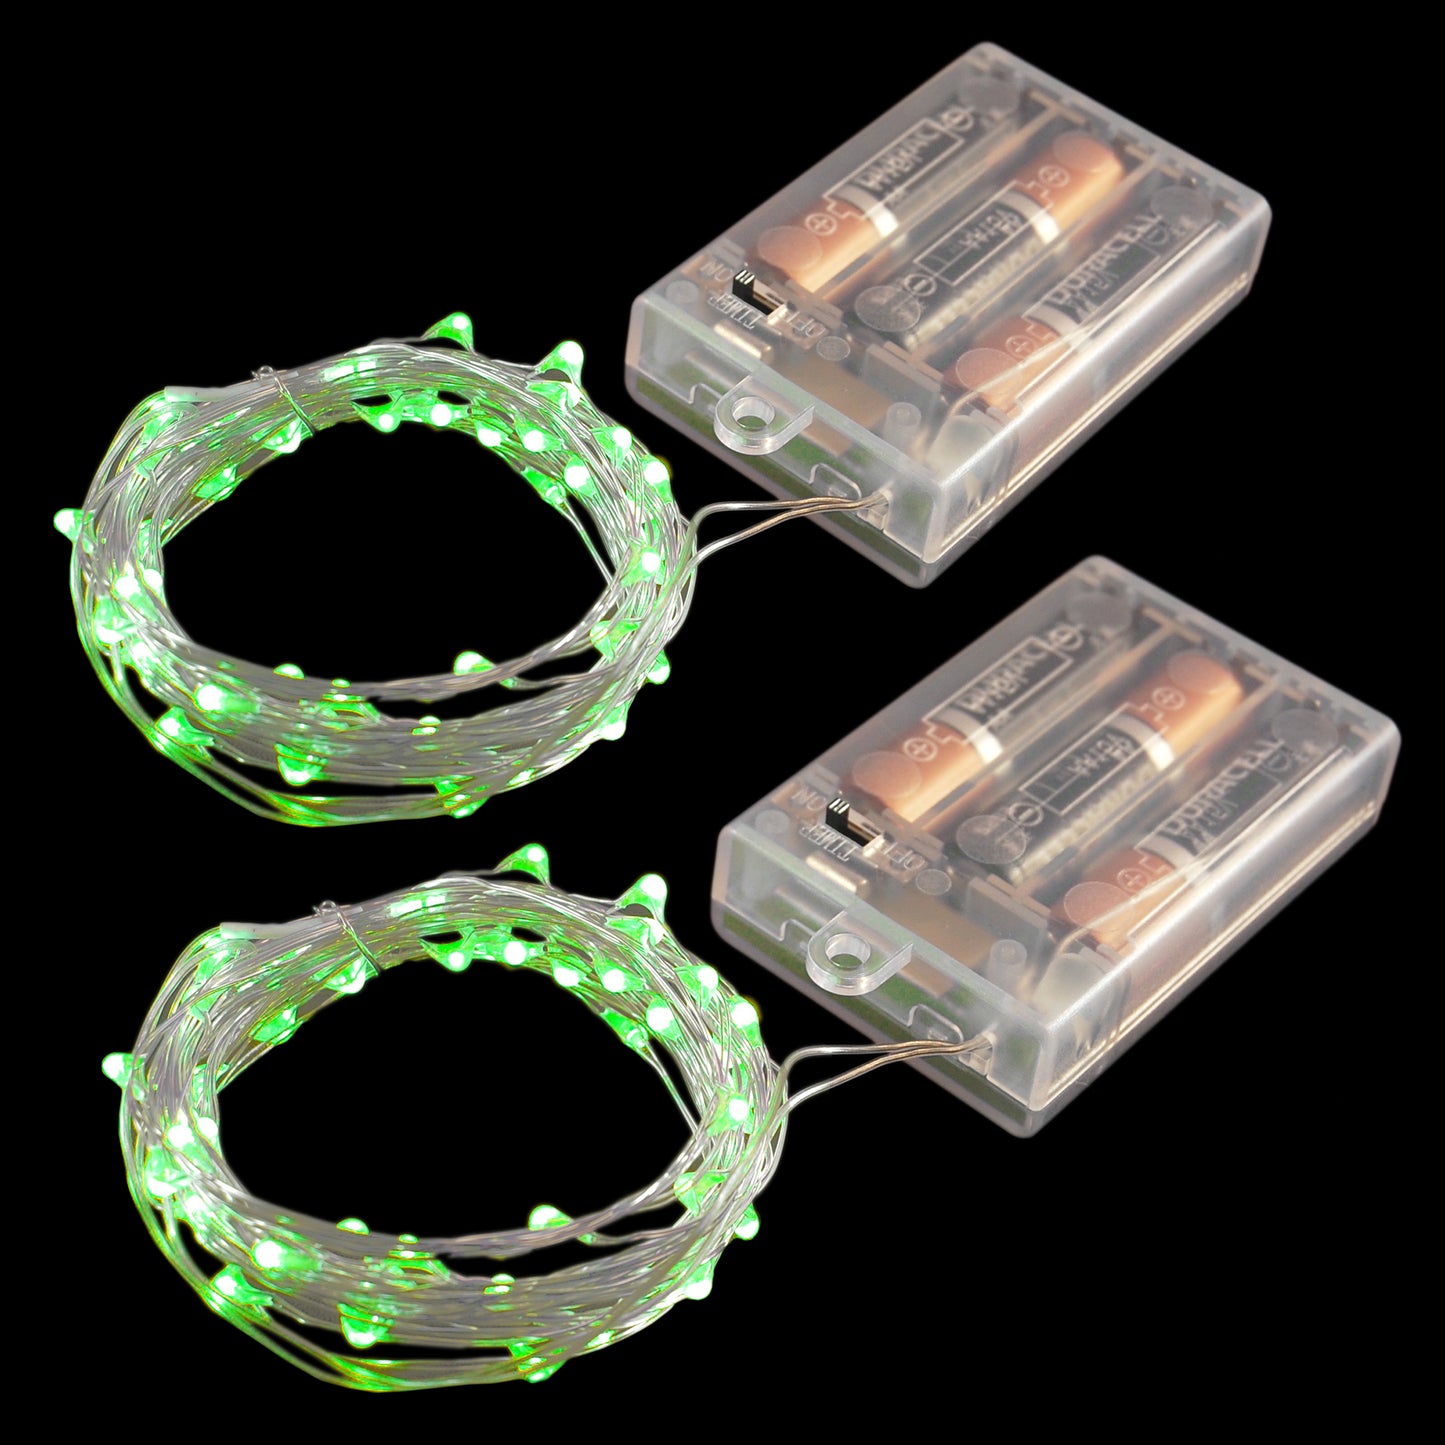 Battery Operated LED Fairy String Lights - Set of 2 - Green